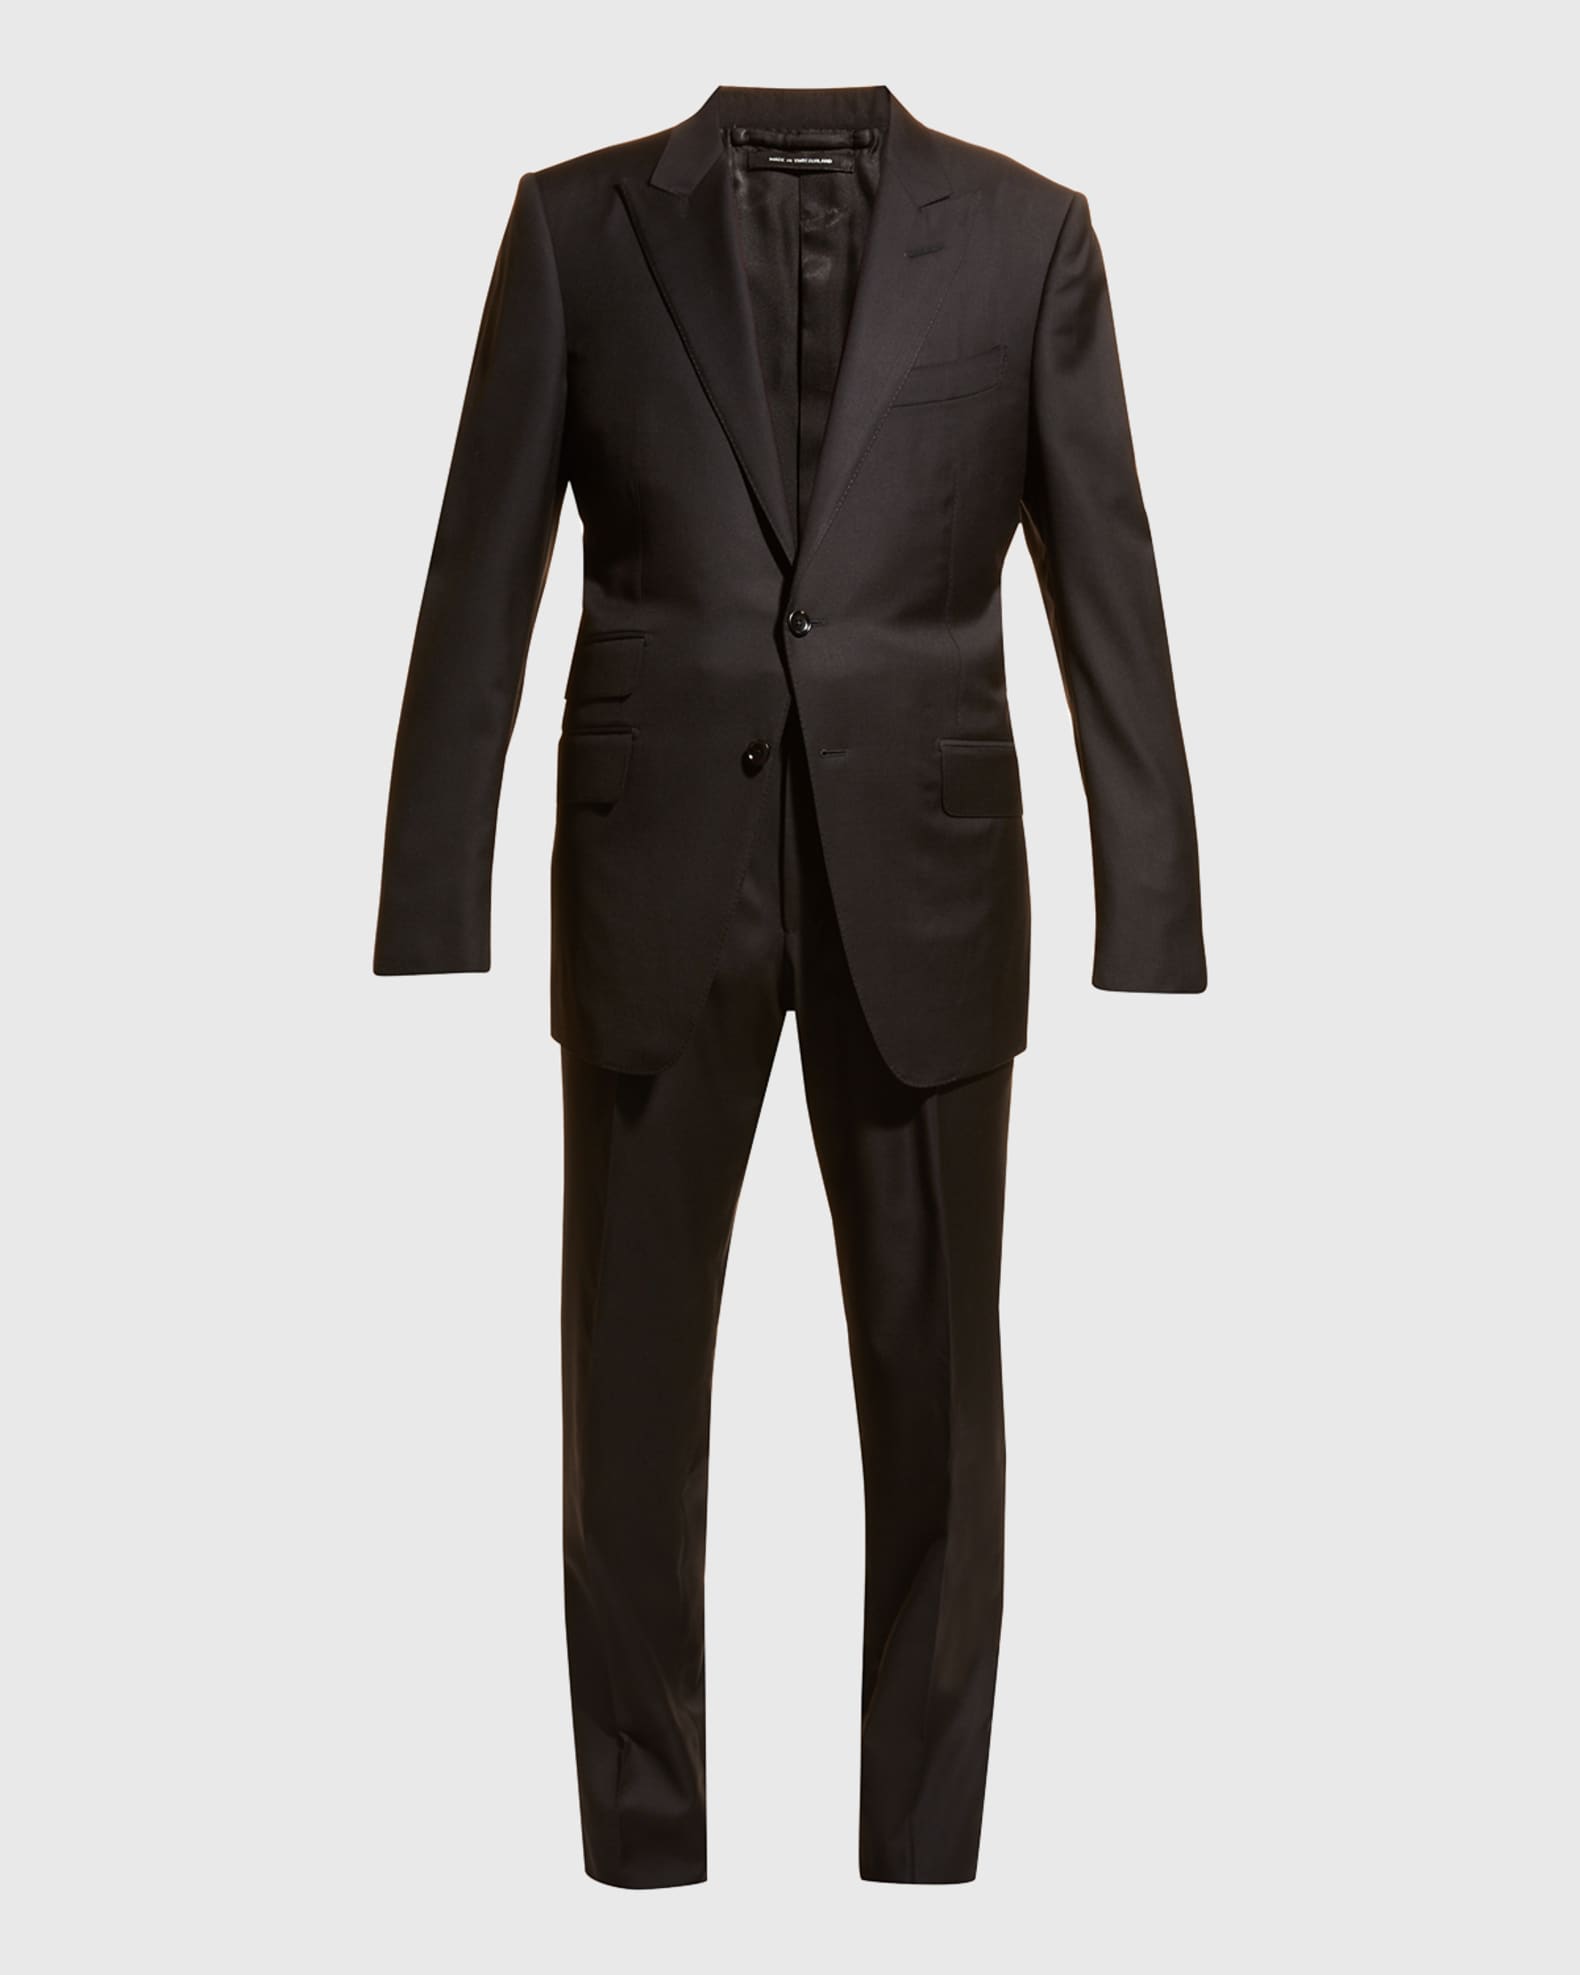 TOM FORD Men's Solid Master Twill Two-Piece Suit | Neiman Marcus